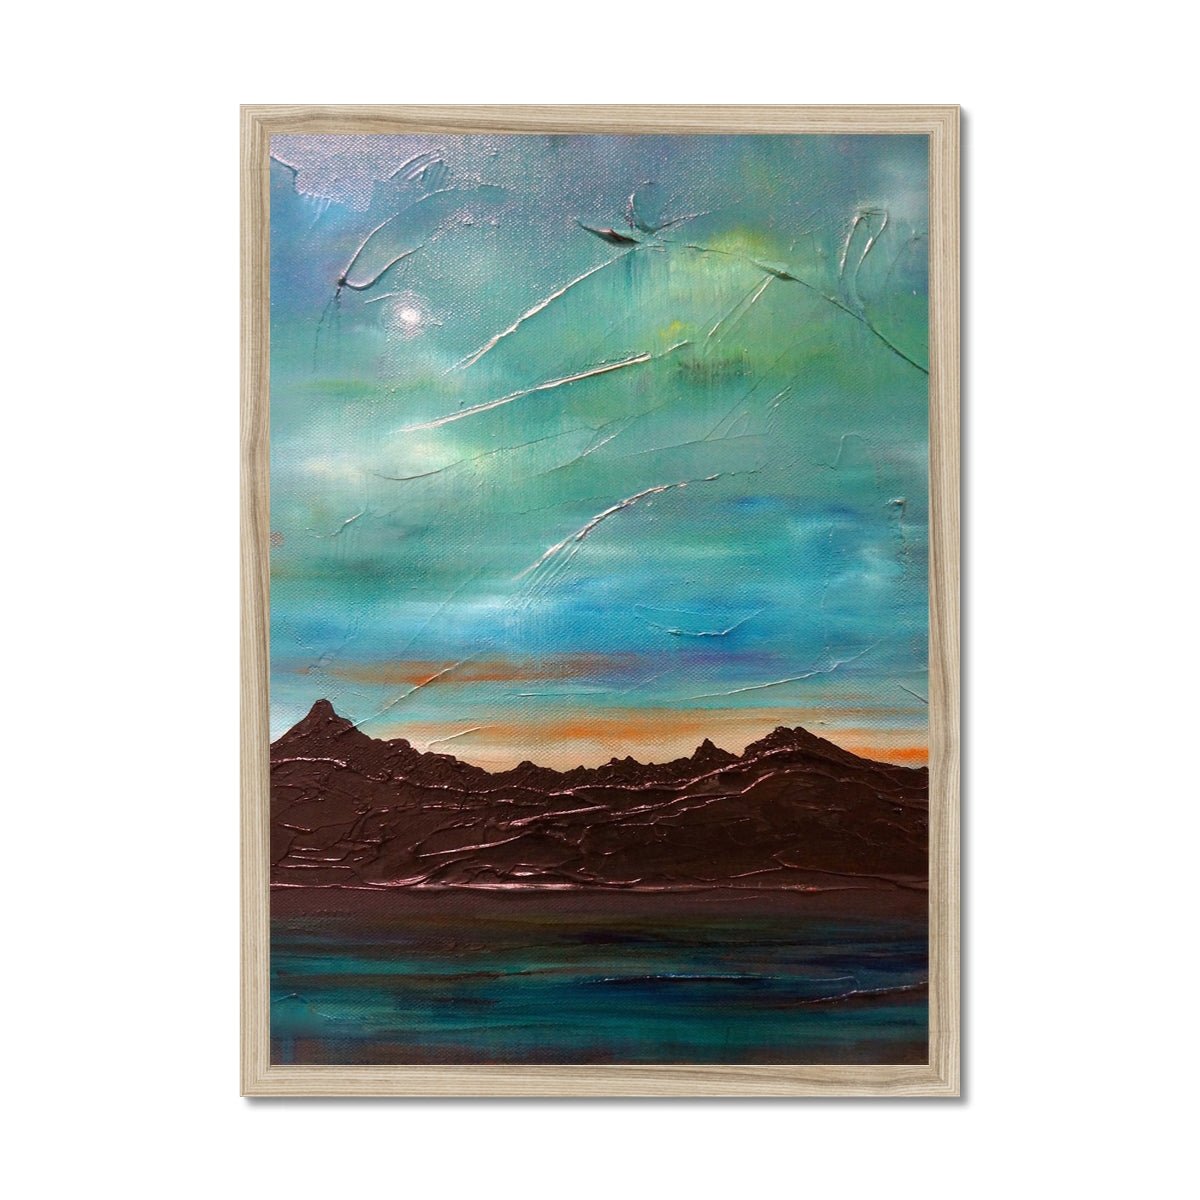 The Cuillin From Elgol Skye Painting | Framed Prints From Scotland-Framed Prints-Skye Art Gallery-A2 Portrait-Natural Frame-Paintings, Prints, Homeware, Art Gifts From Scotland By Scottish Artist Kevin Hunter